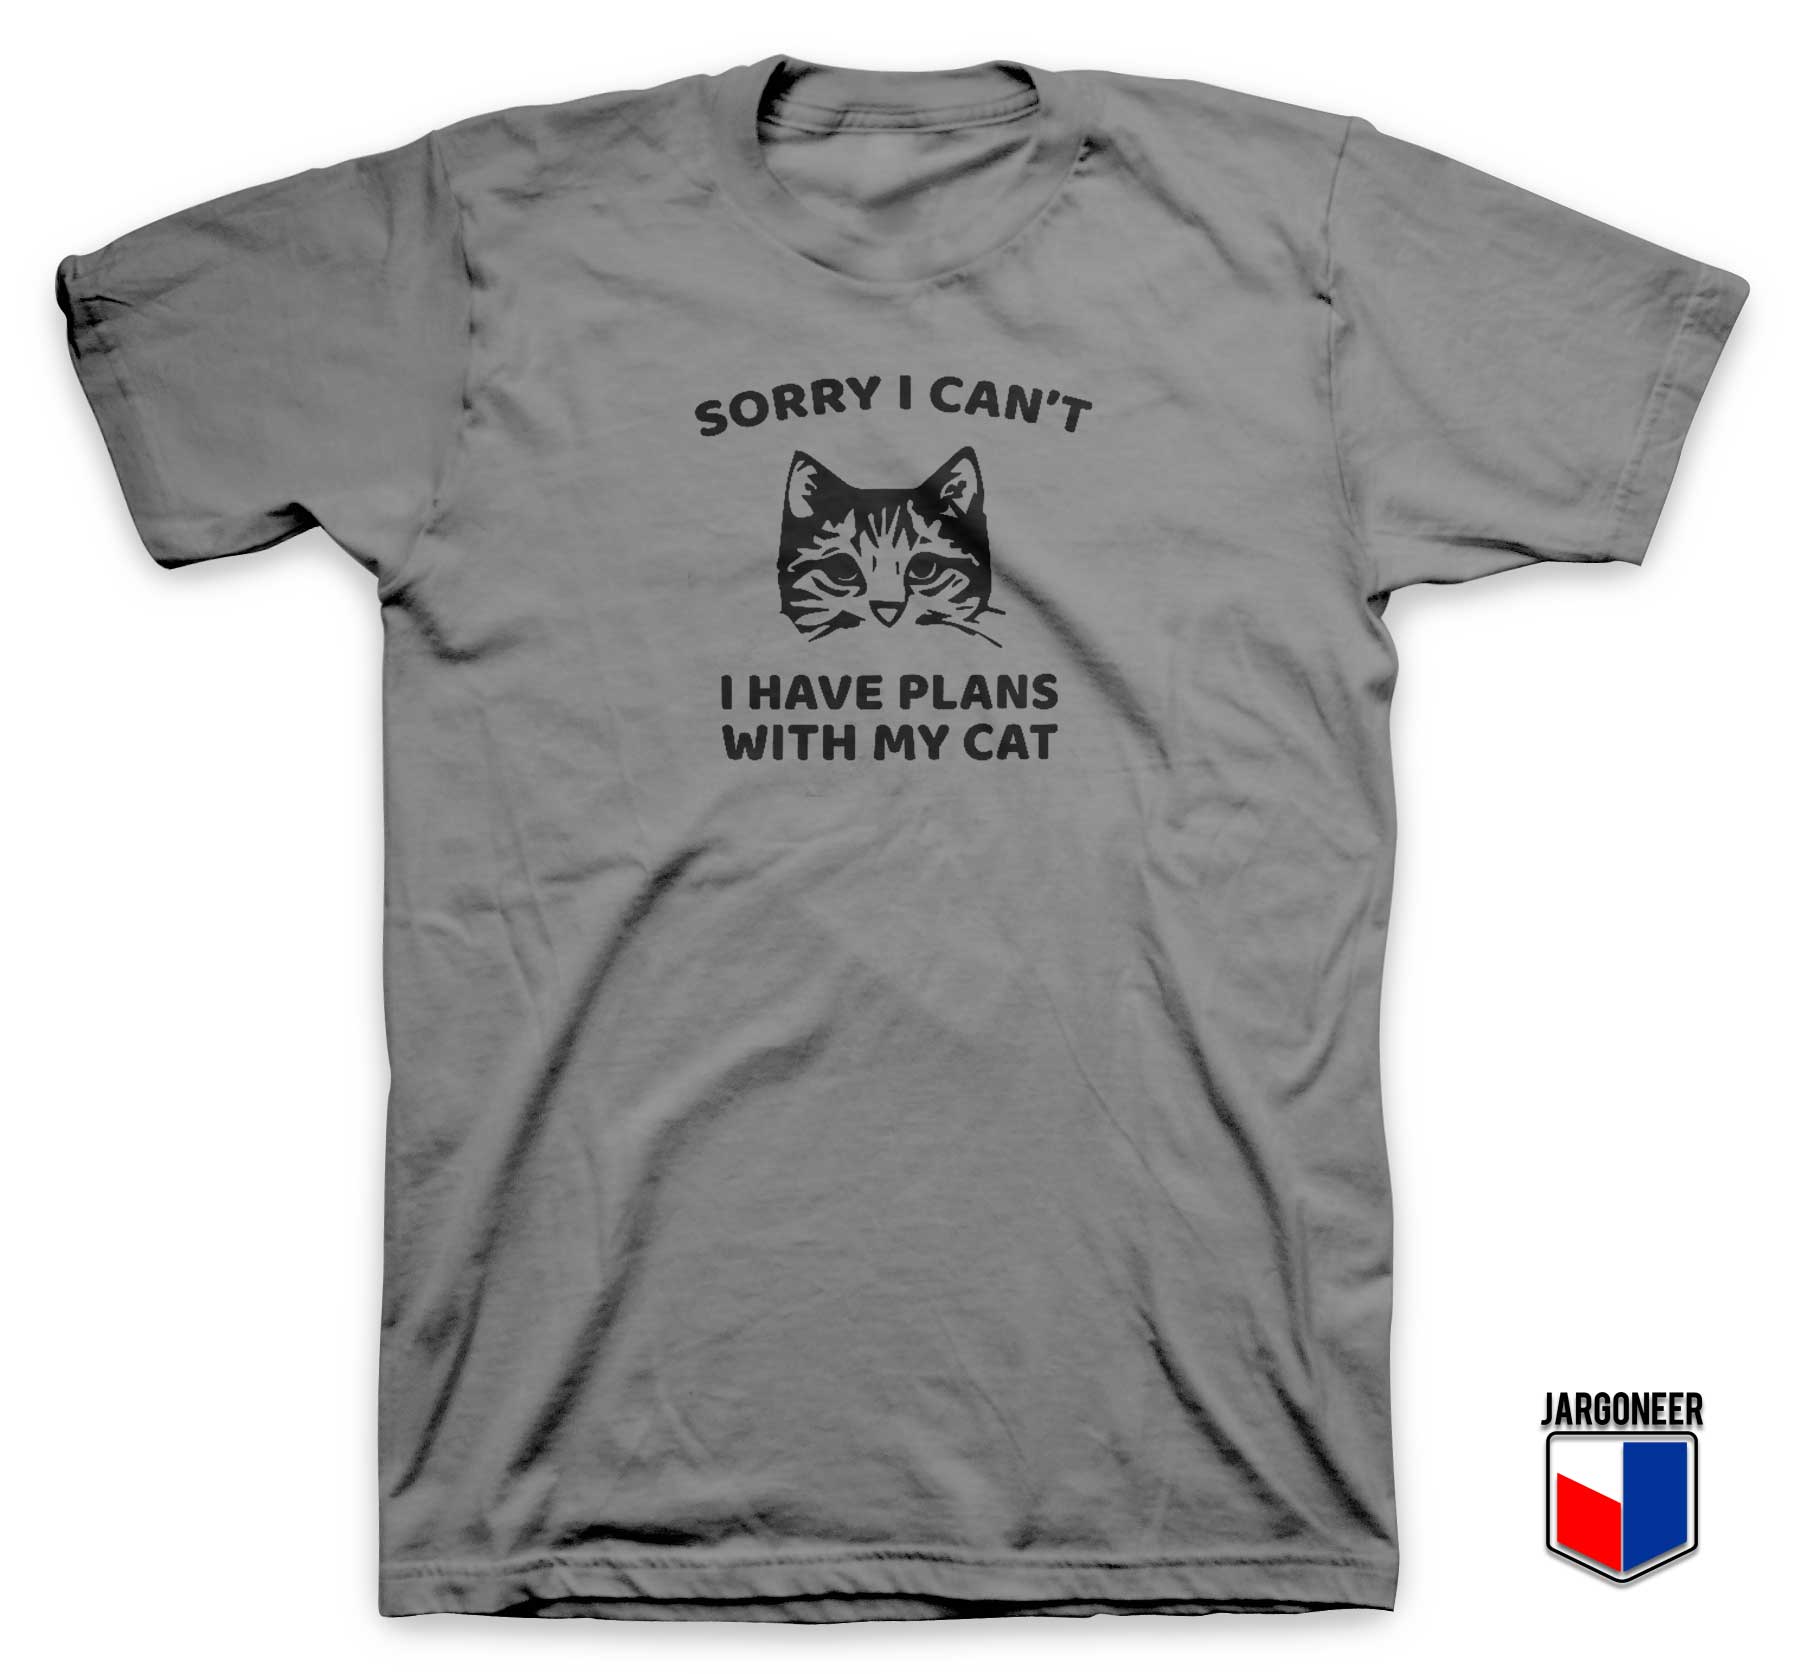 Sorry I Can't I Have Plans With My Cat T Shirt Cat T Shirt - Jargoneer.com